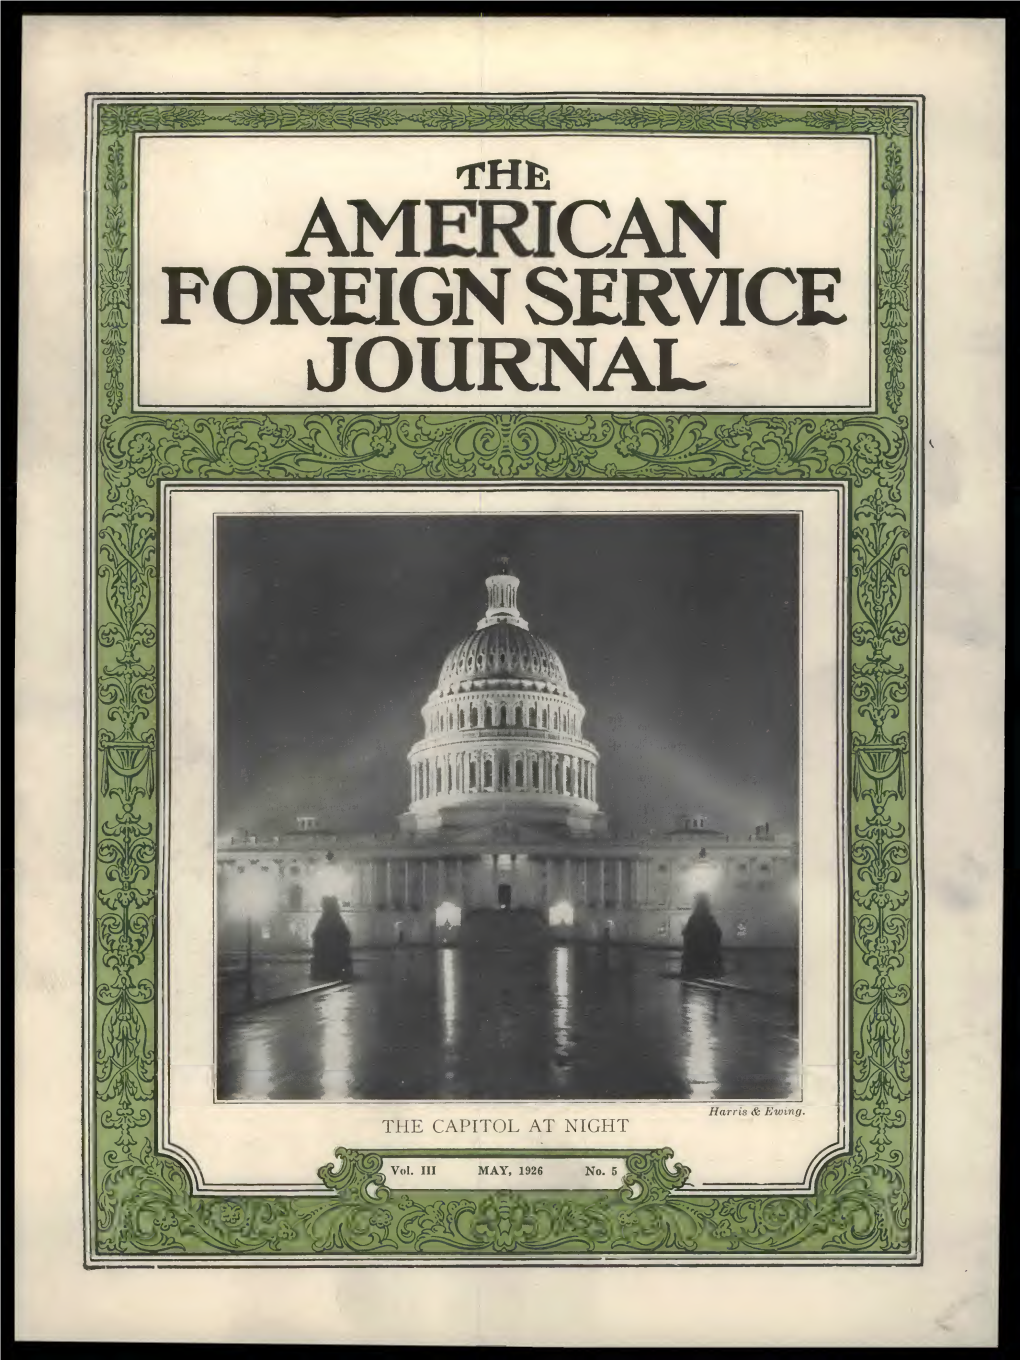 The Foreign Service Journal, May 1926